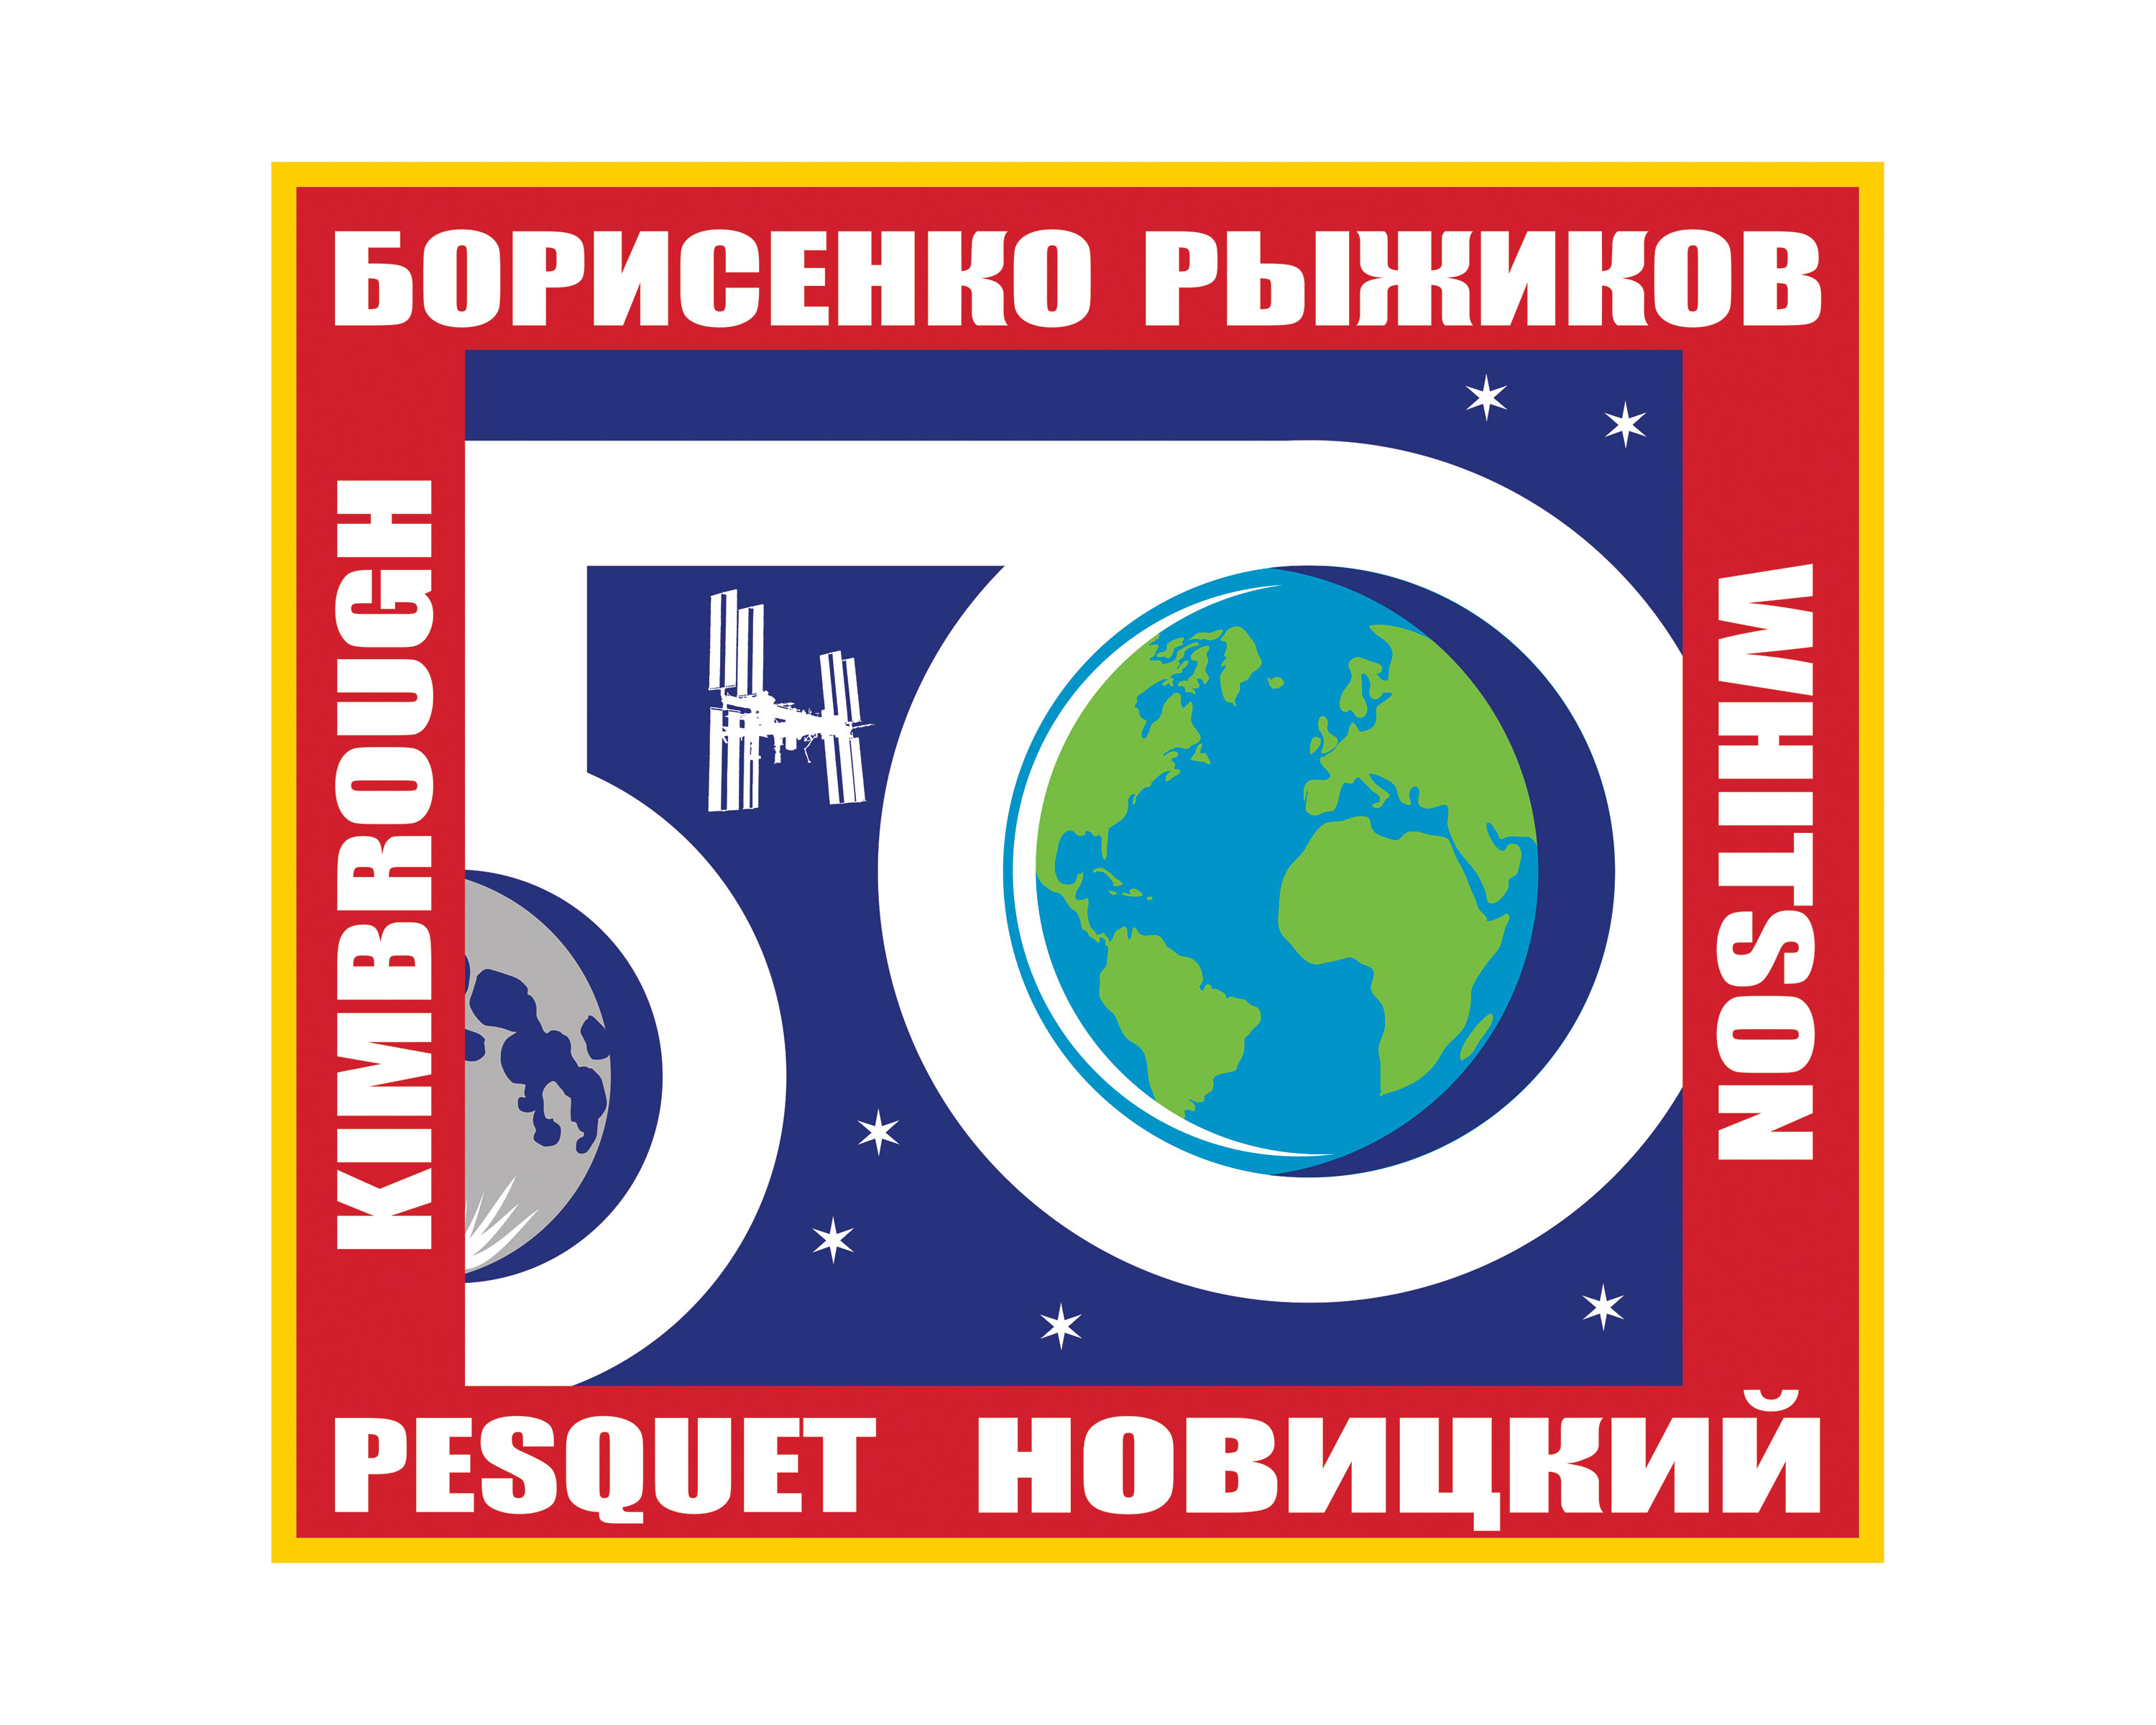 Expedition 50 Official Crew Insignia